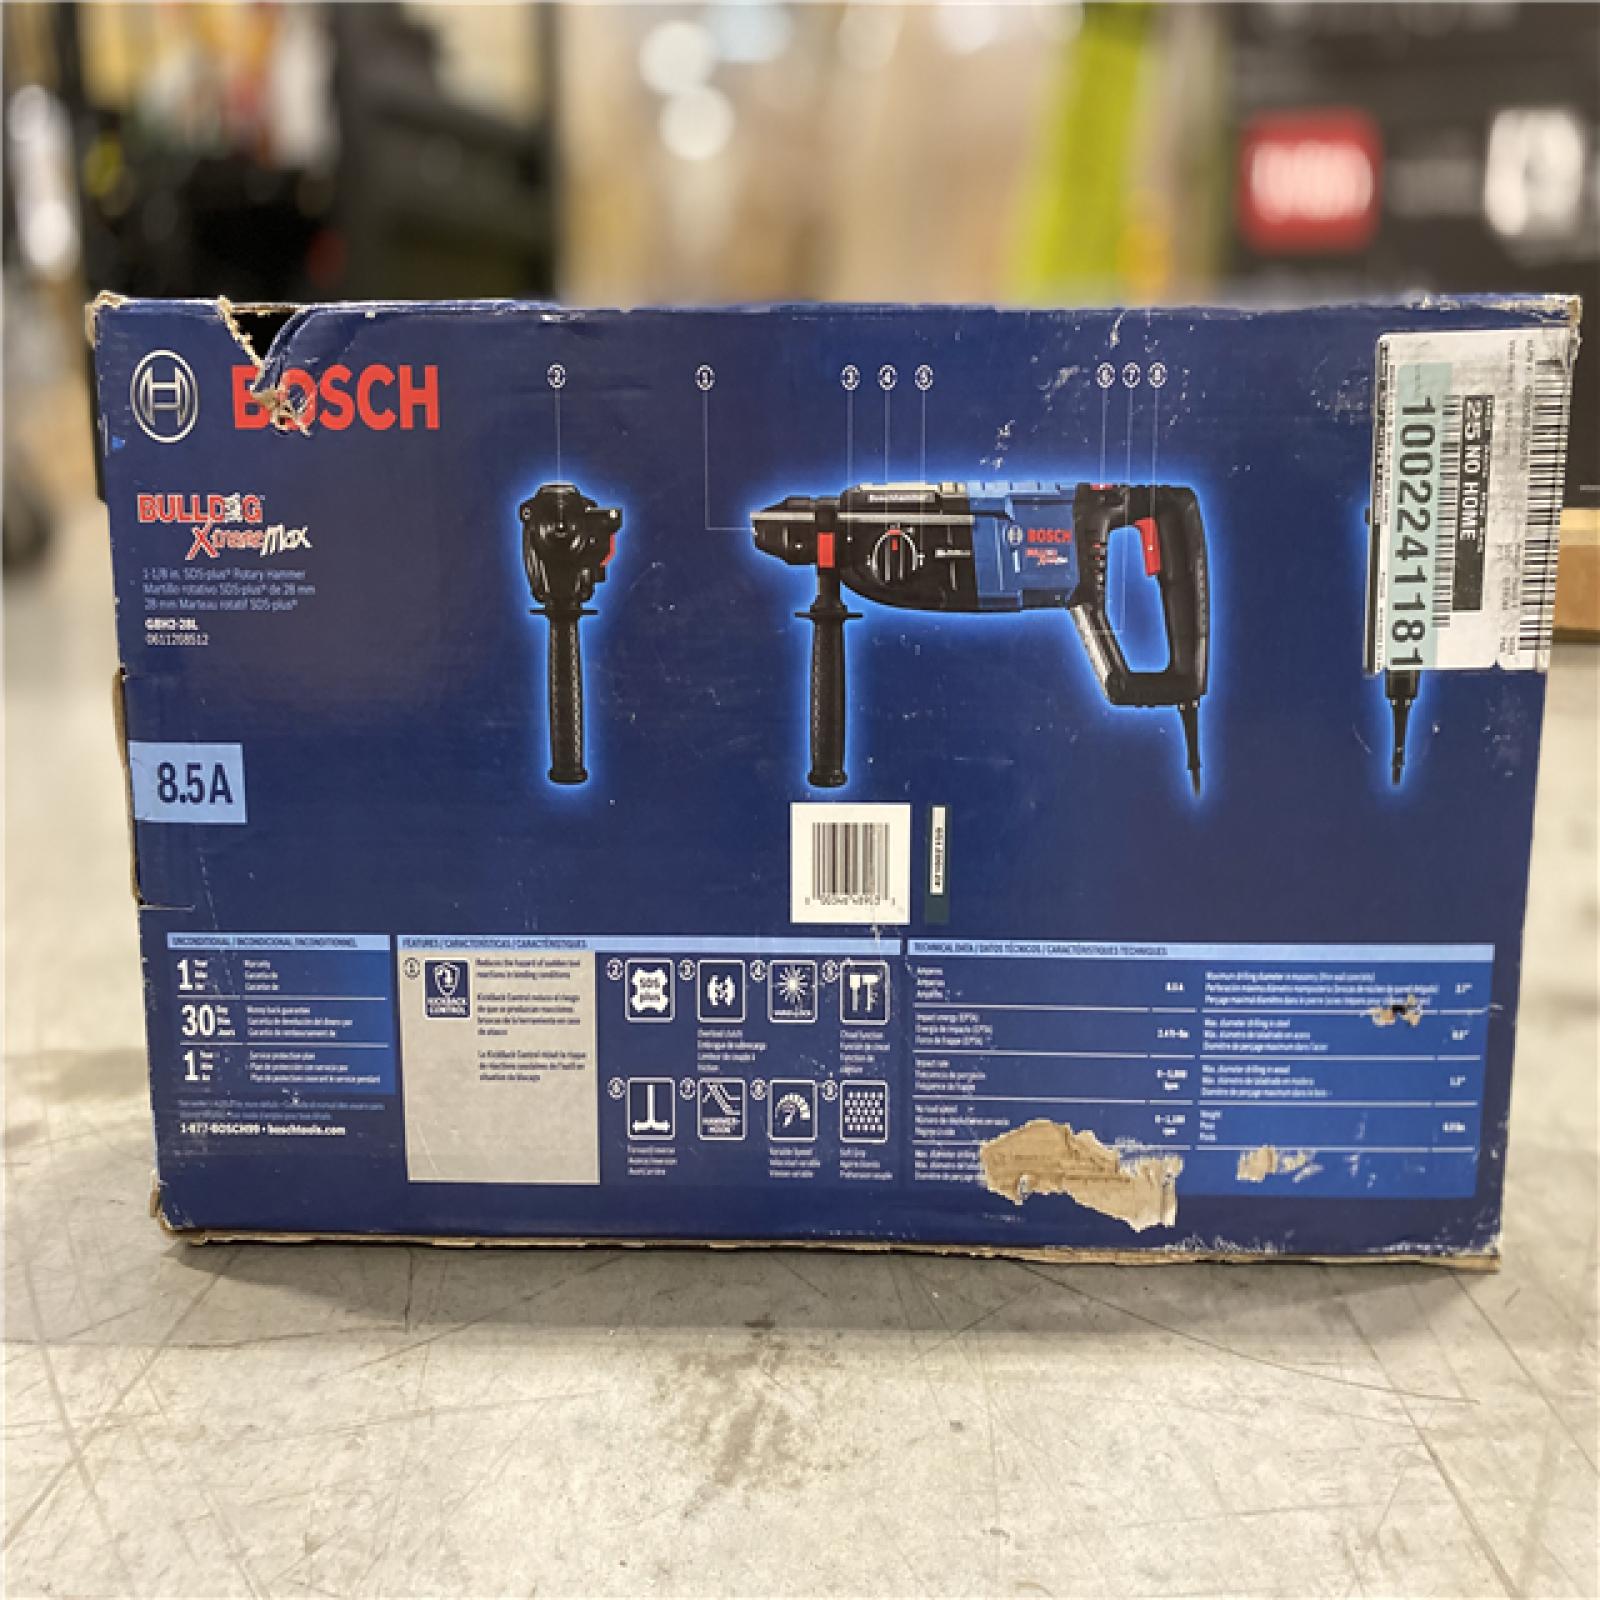 DALLAS LOCATION - Bosch 8.5 Amp Corded 1-1/8 in. SDS-Plus Variable Speed Concrete/Masonry Rotary Hammer Drill with Carrying Case